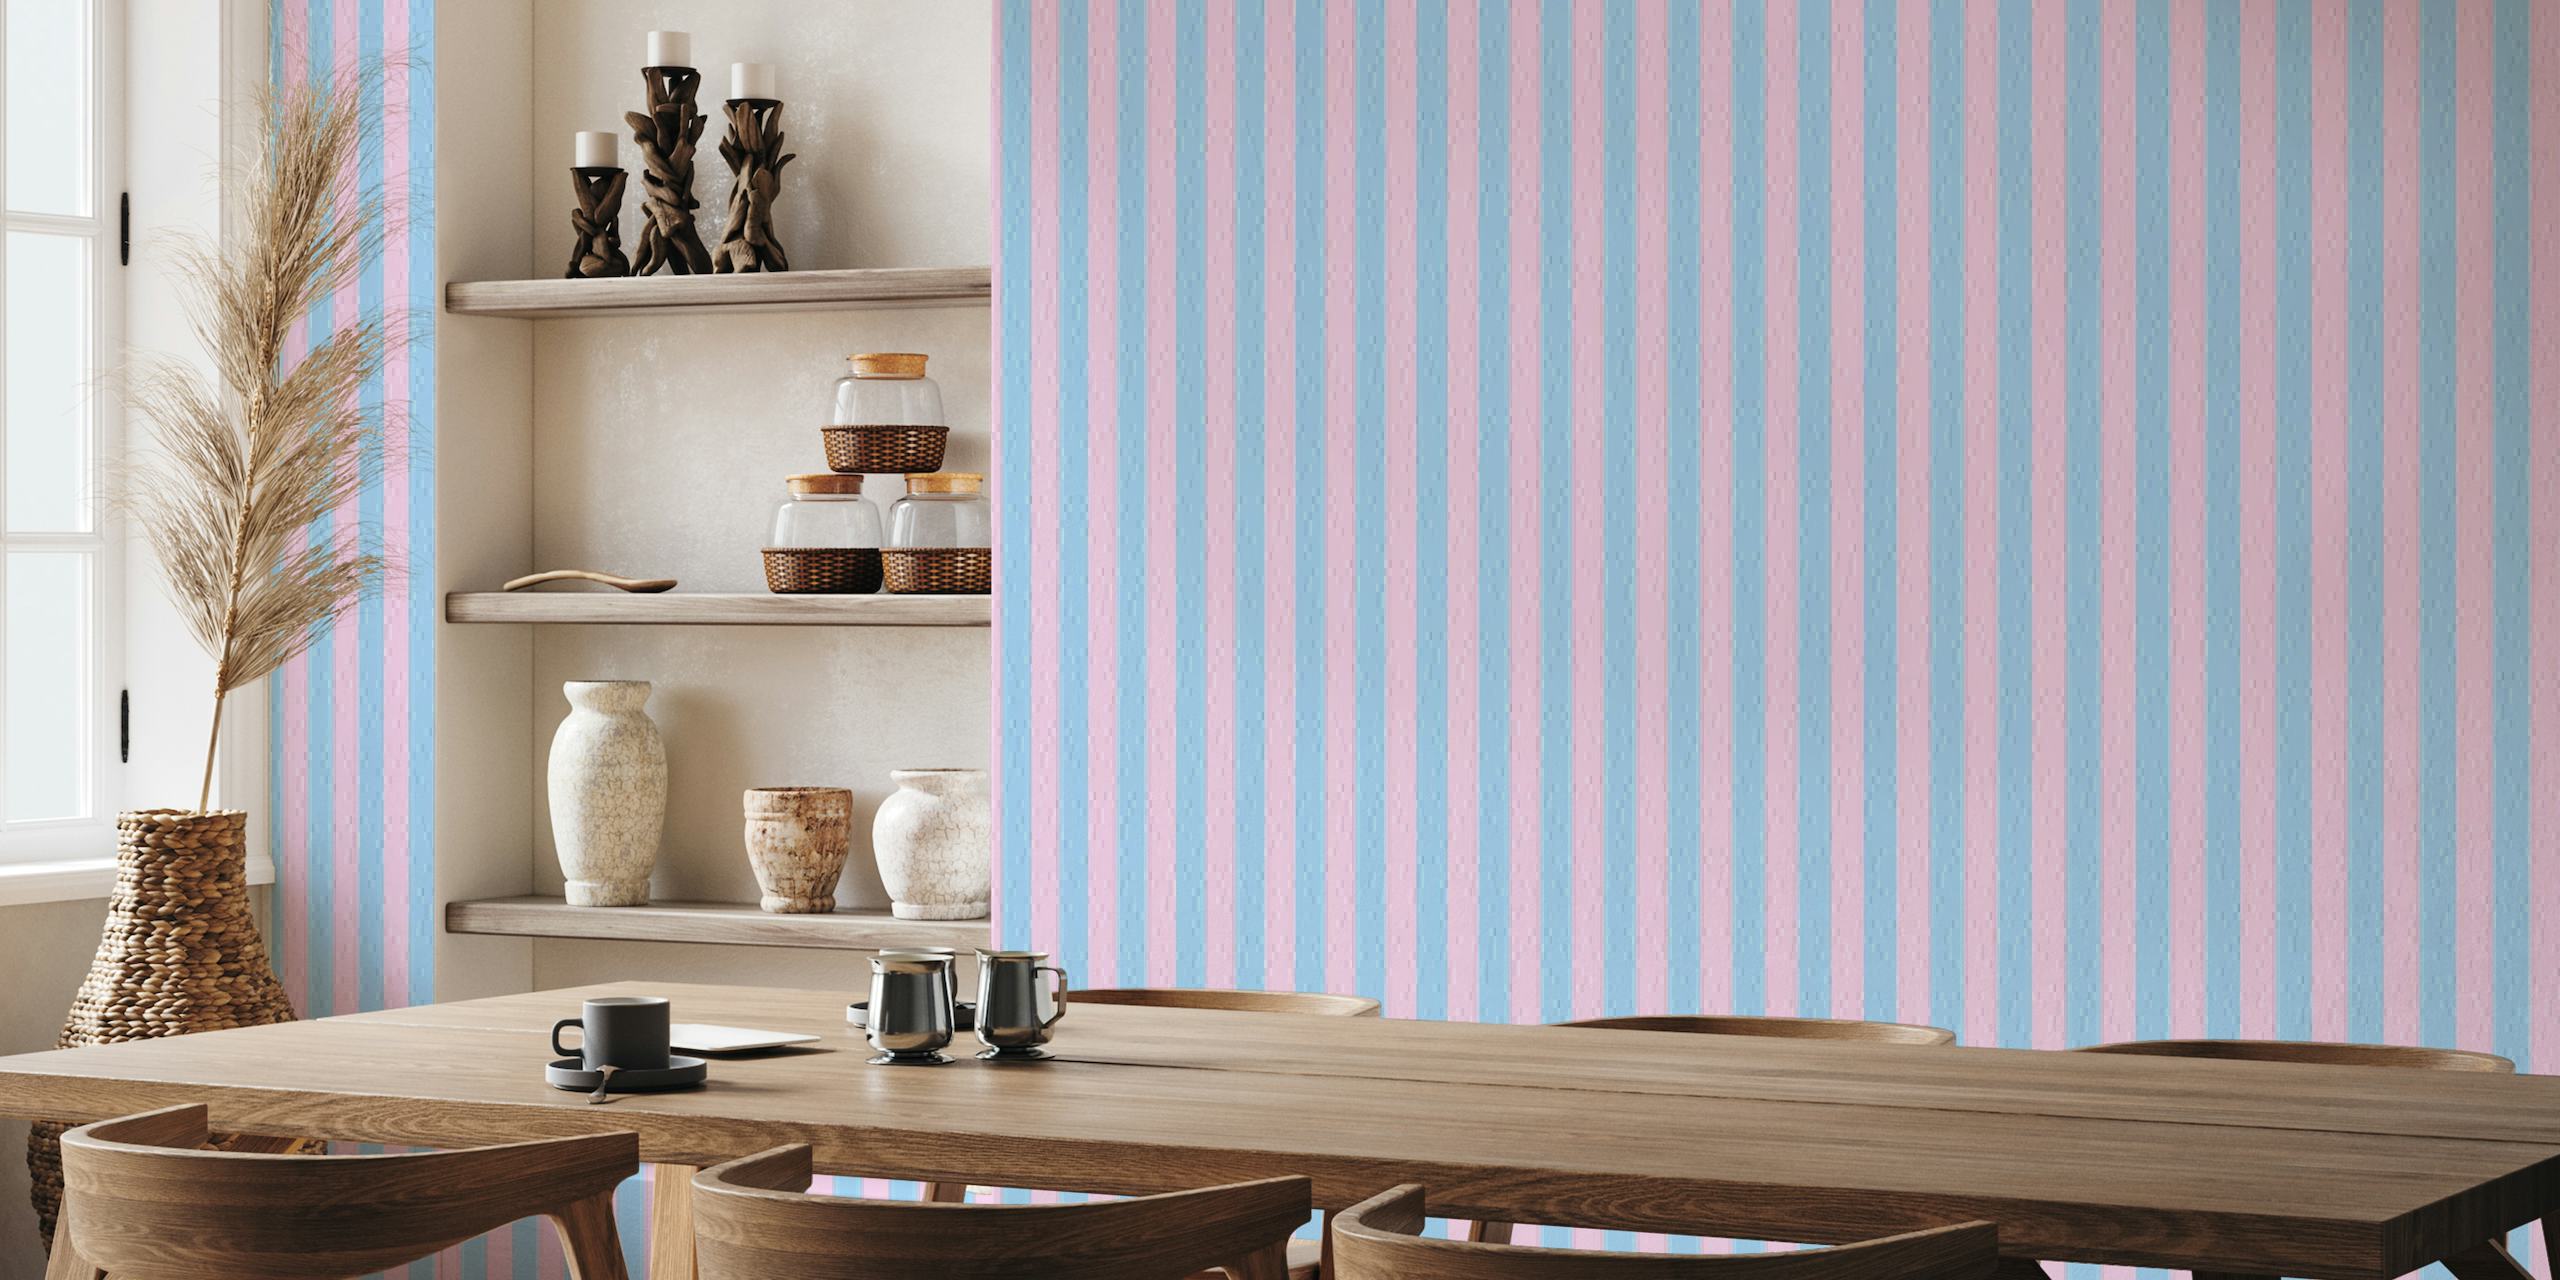 Rosa and blue vertical stripes wallpaper